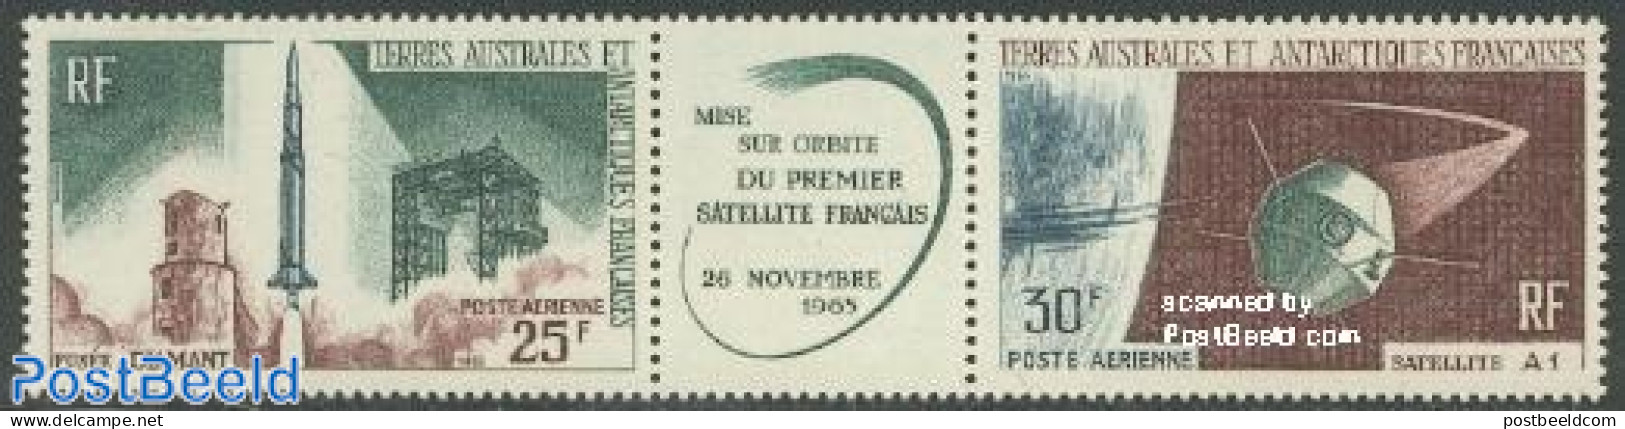 French Antarctic Territory 1966 Satellites 2v+tab [:T:], Mint NH, Transport - Various - Space Exploration - Joint Issues - Nuevos